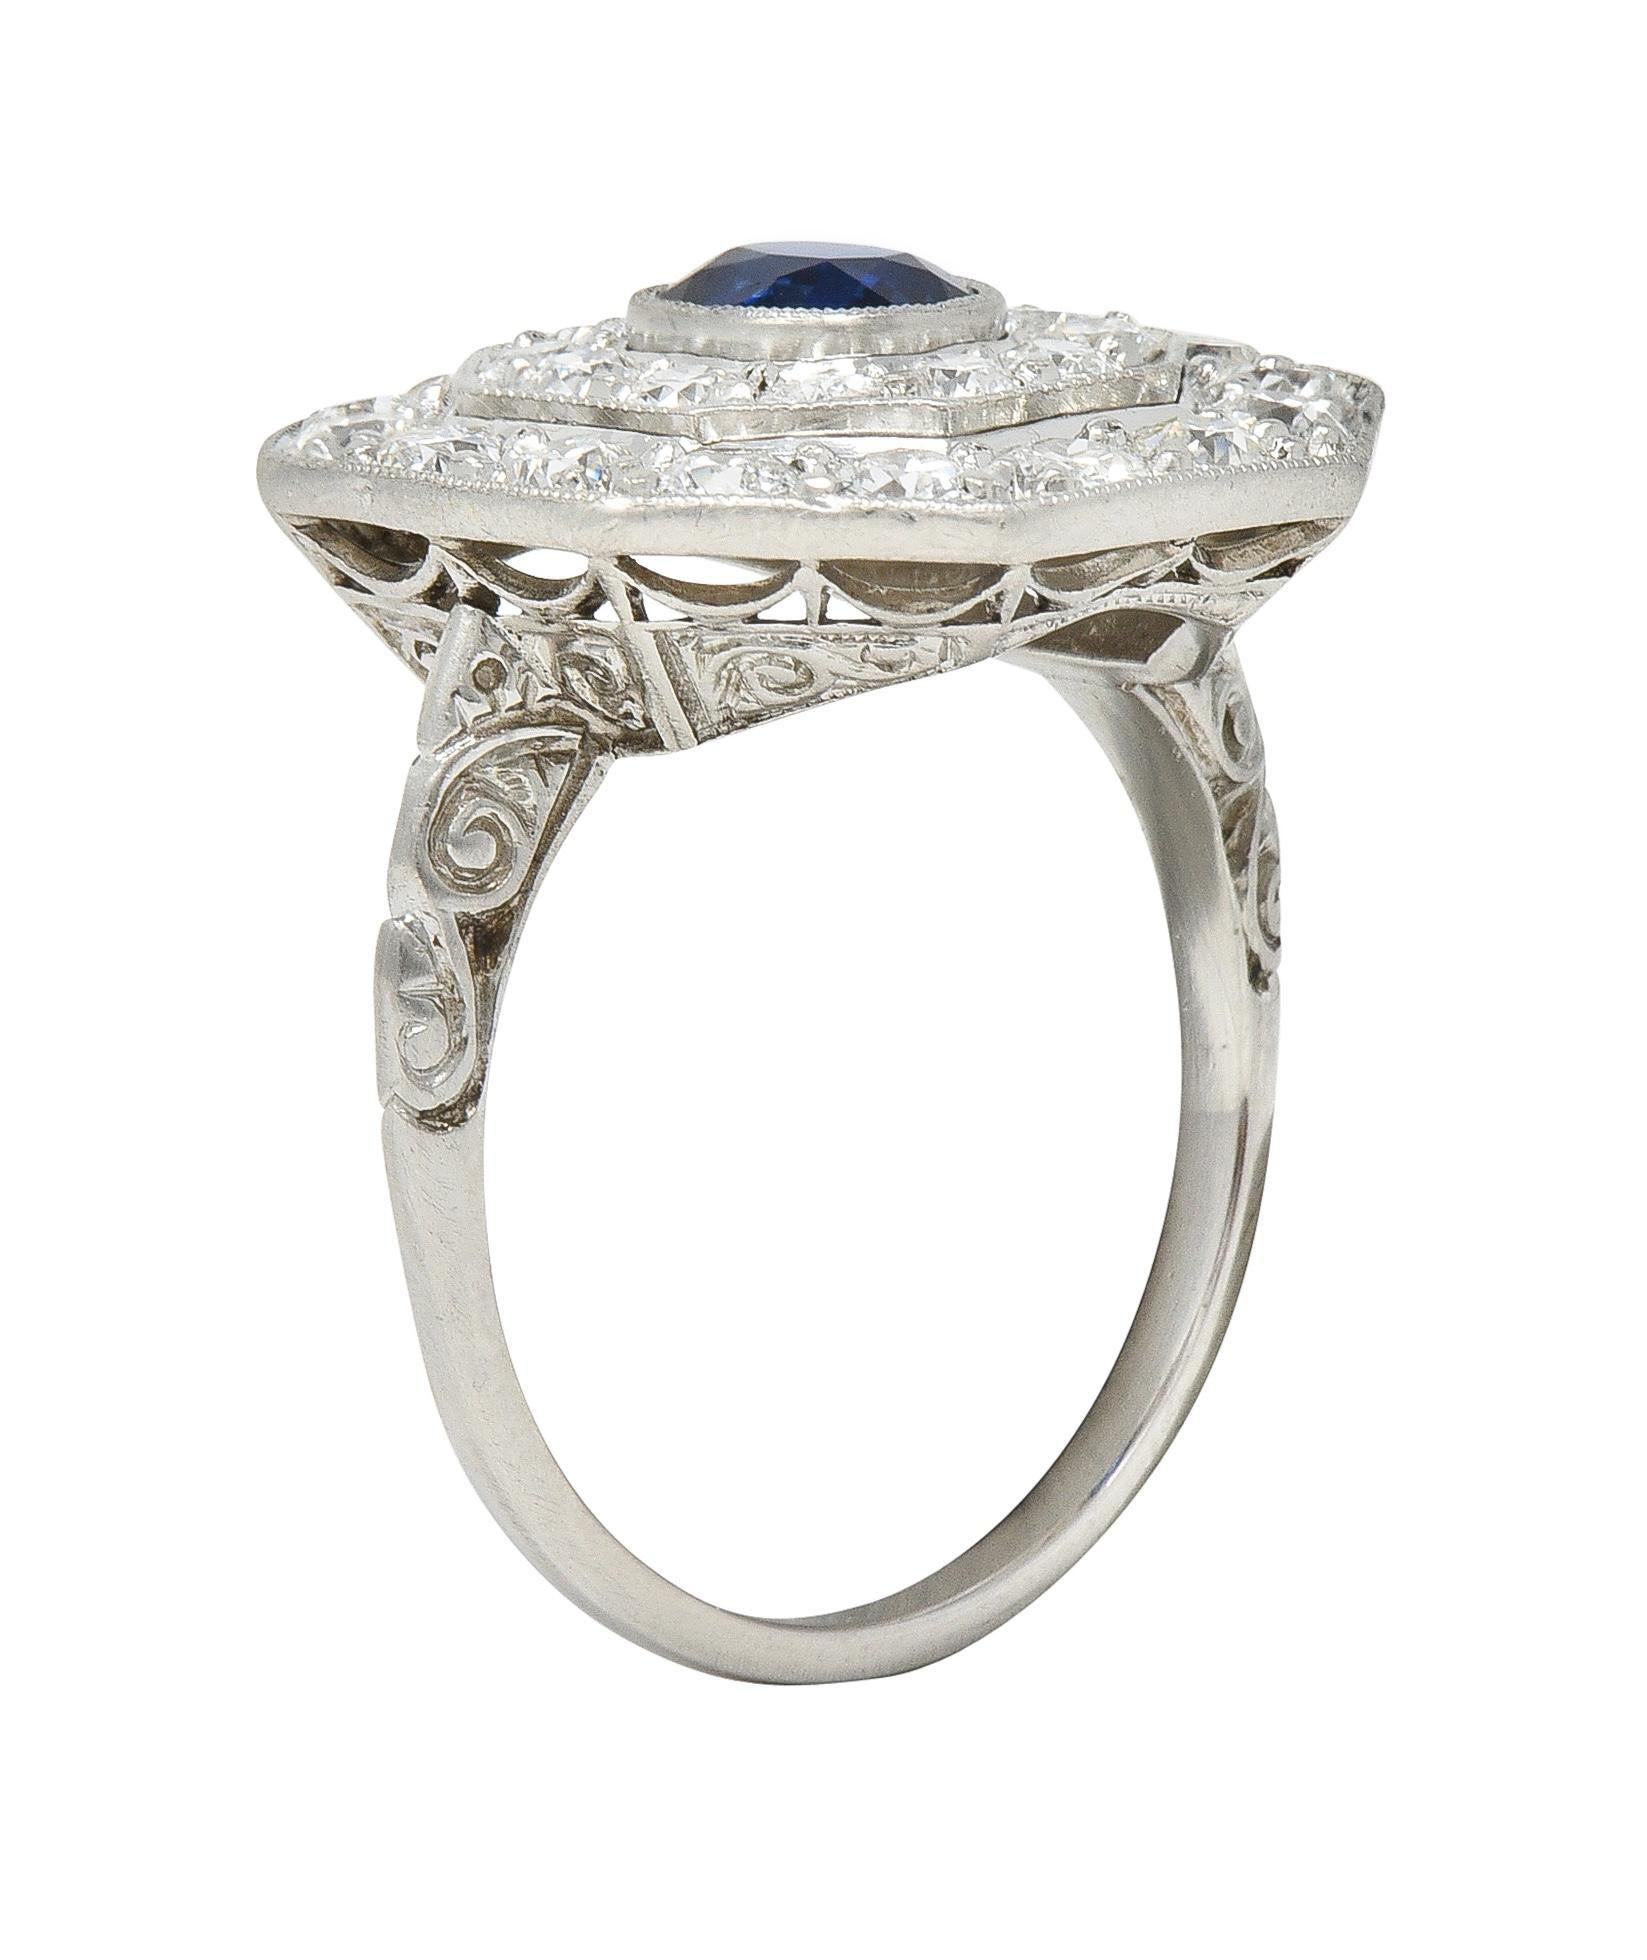 Centering a cushion cut sapphire weighing 0.82 carats - saturated deep blue in color 
Bezel set with stepped octagonal double halo surround
With old European cut diamonds weighing 2.04 carats - F/G color with VS clarity 
Accented by milgrain